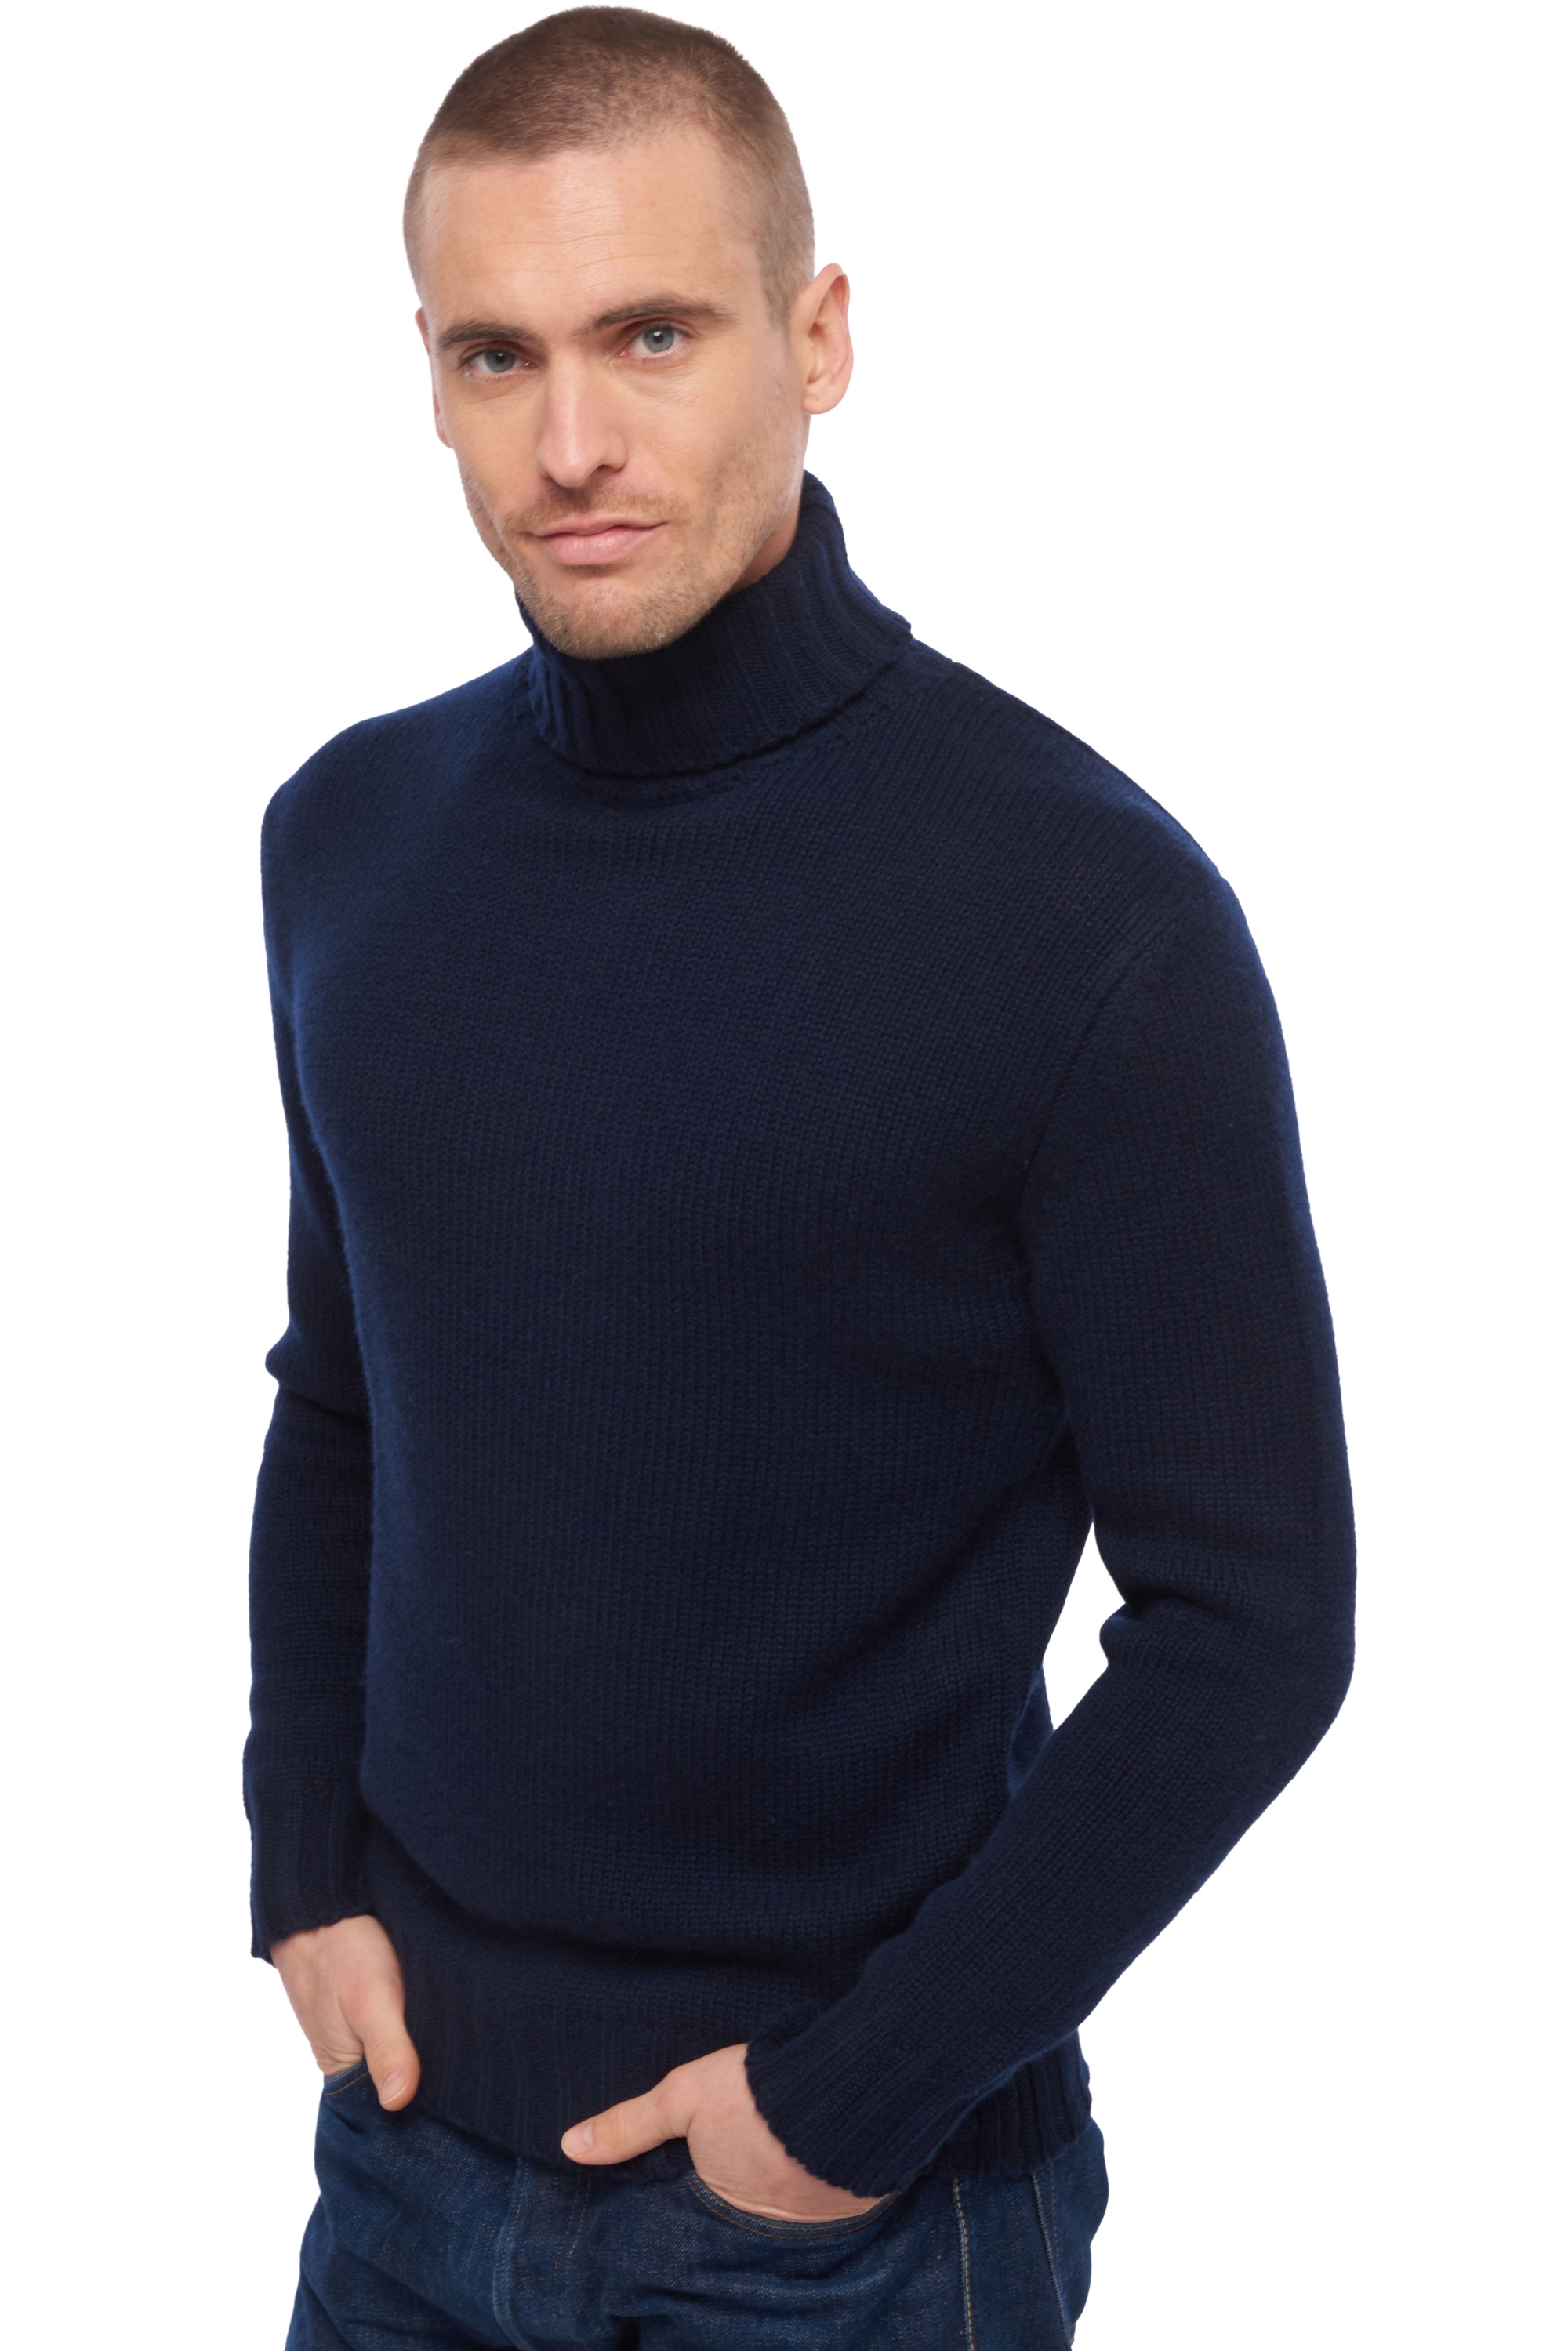 Cachemire pull homme col roule achille marine fonce m